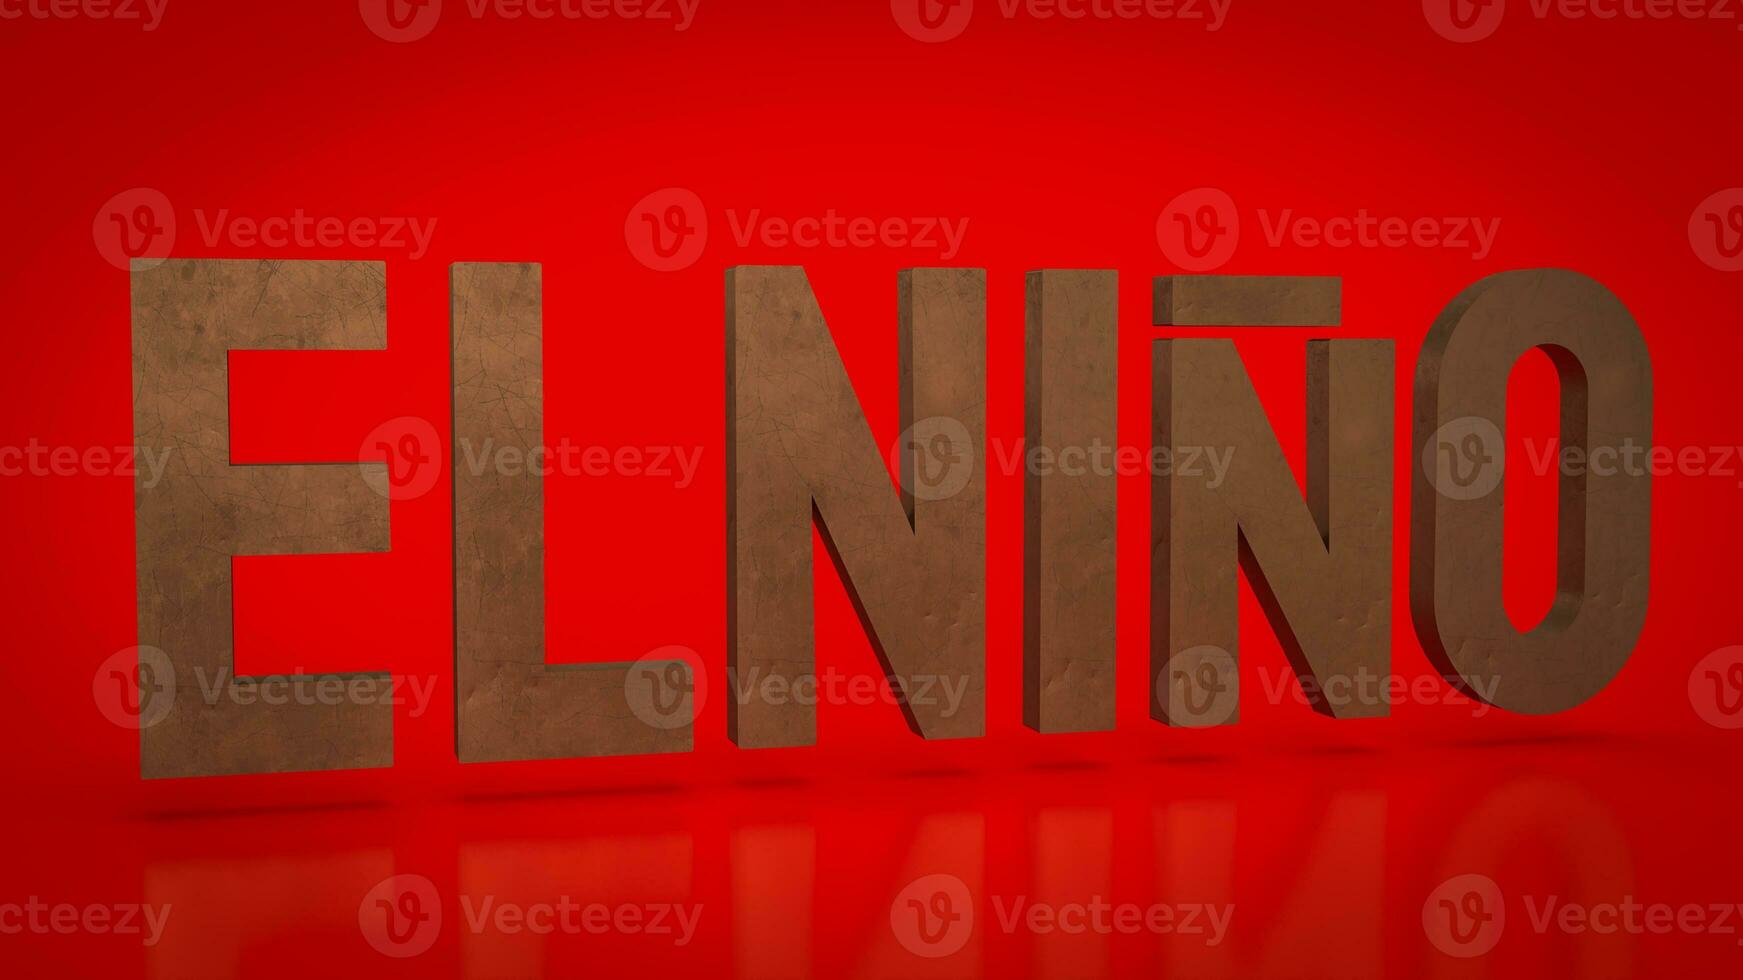 The El Nino text on red Background  3d rendering photo